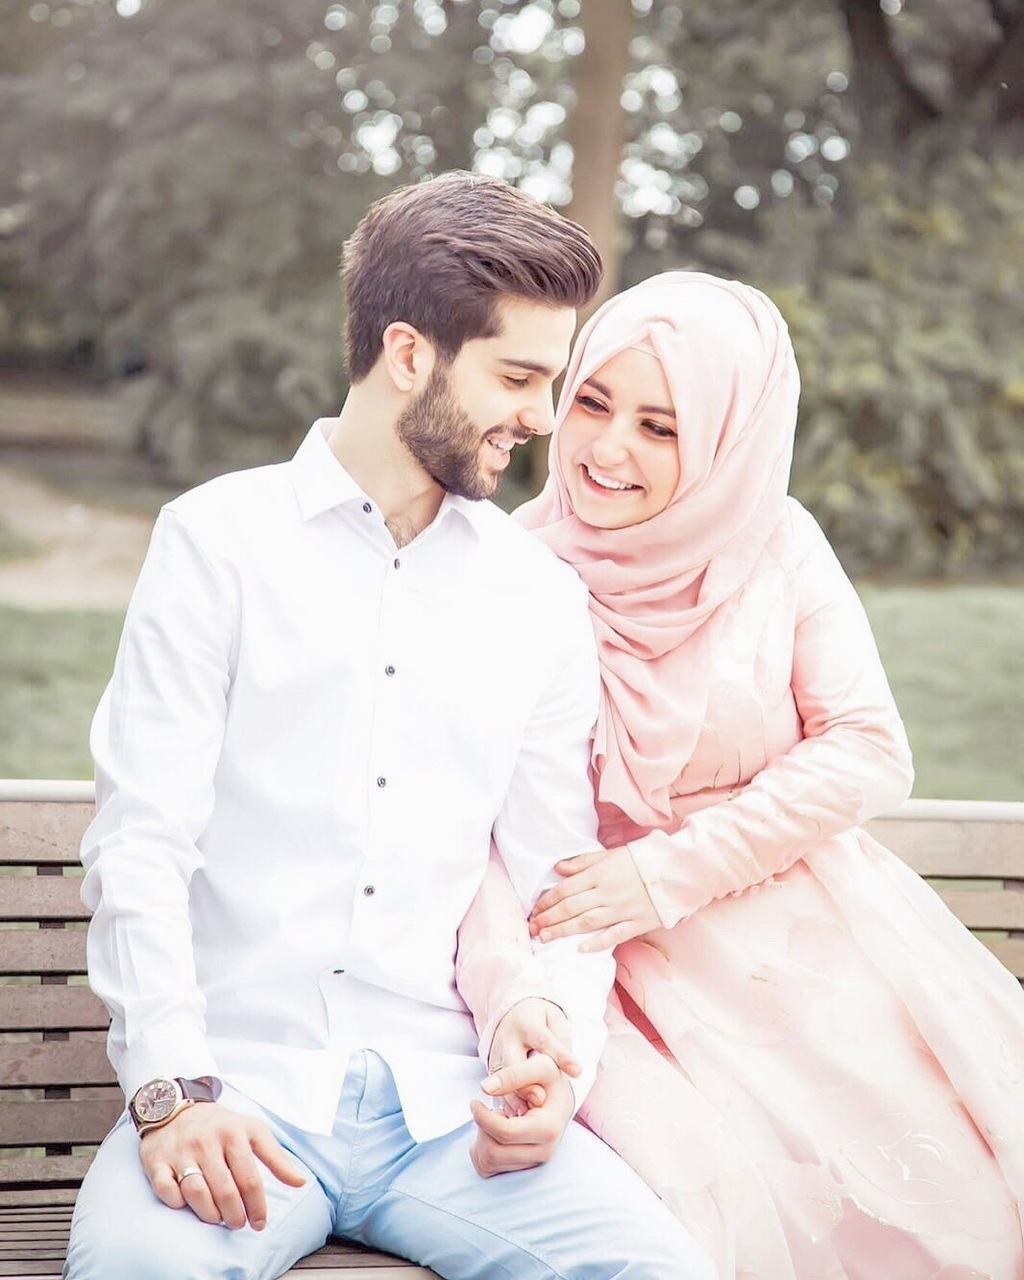 Muslim Couples Picture Wallpapers